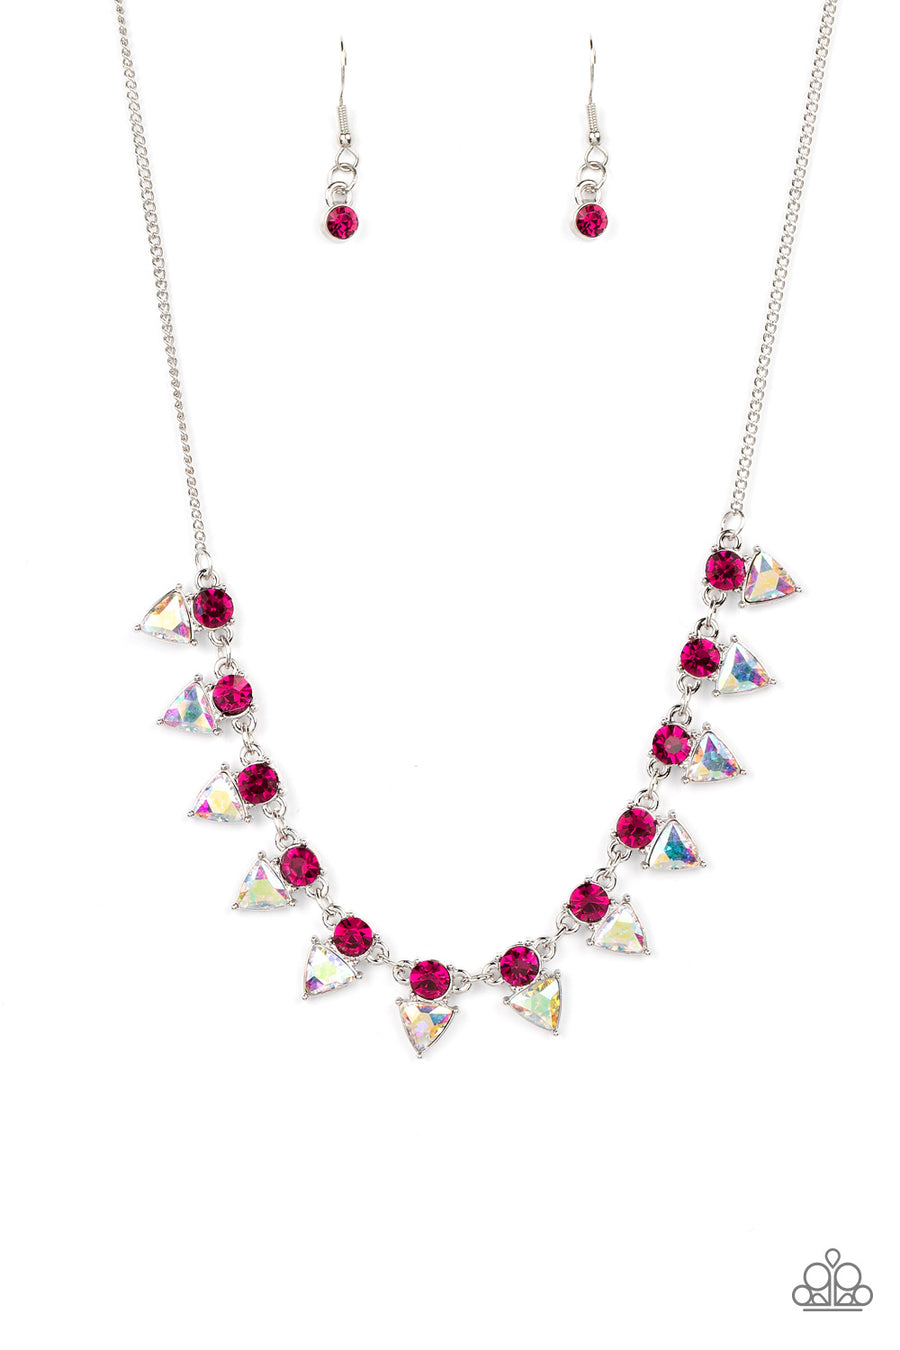 Razor-Sharp Refinement - Pink Iridescent and Silver Necklace - Paparazzi Accessories - Solitaire pink rhinestones sparkle atop iridescent prism-like gems below the collar, linking into a sharp-looking statement piece. Features an adjustable clasp closure.